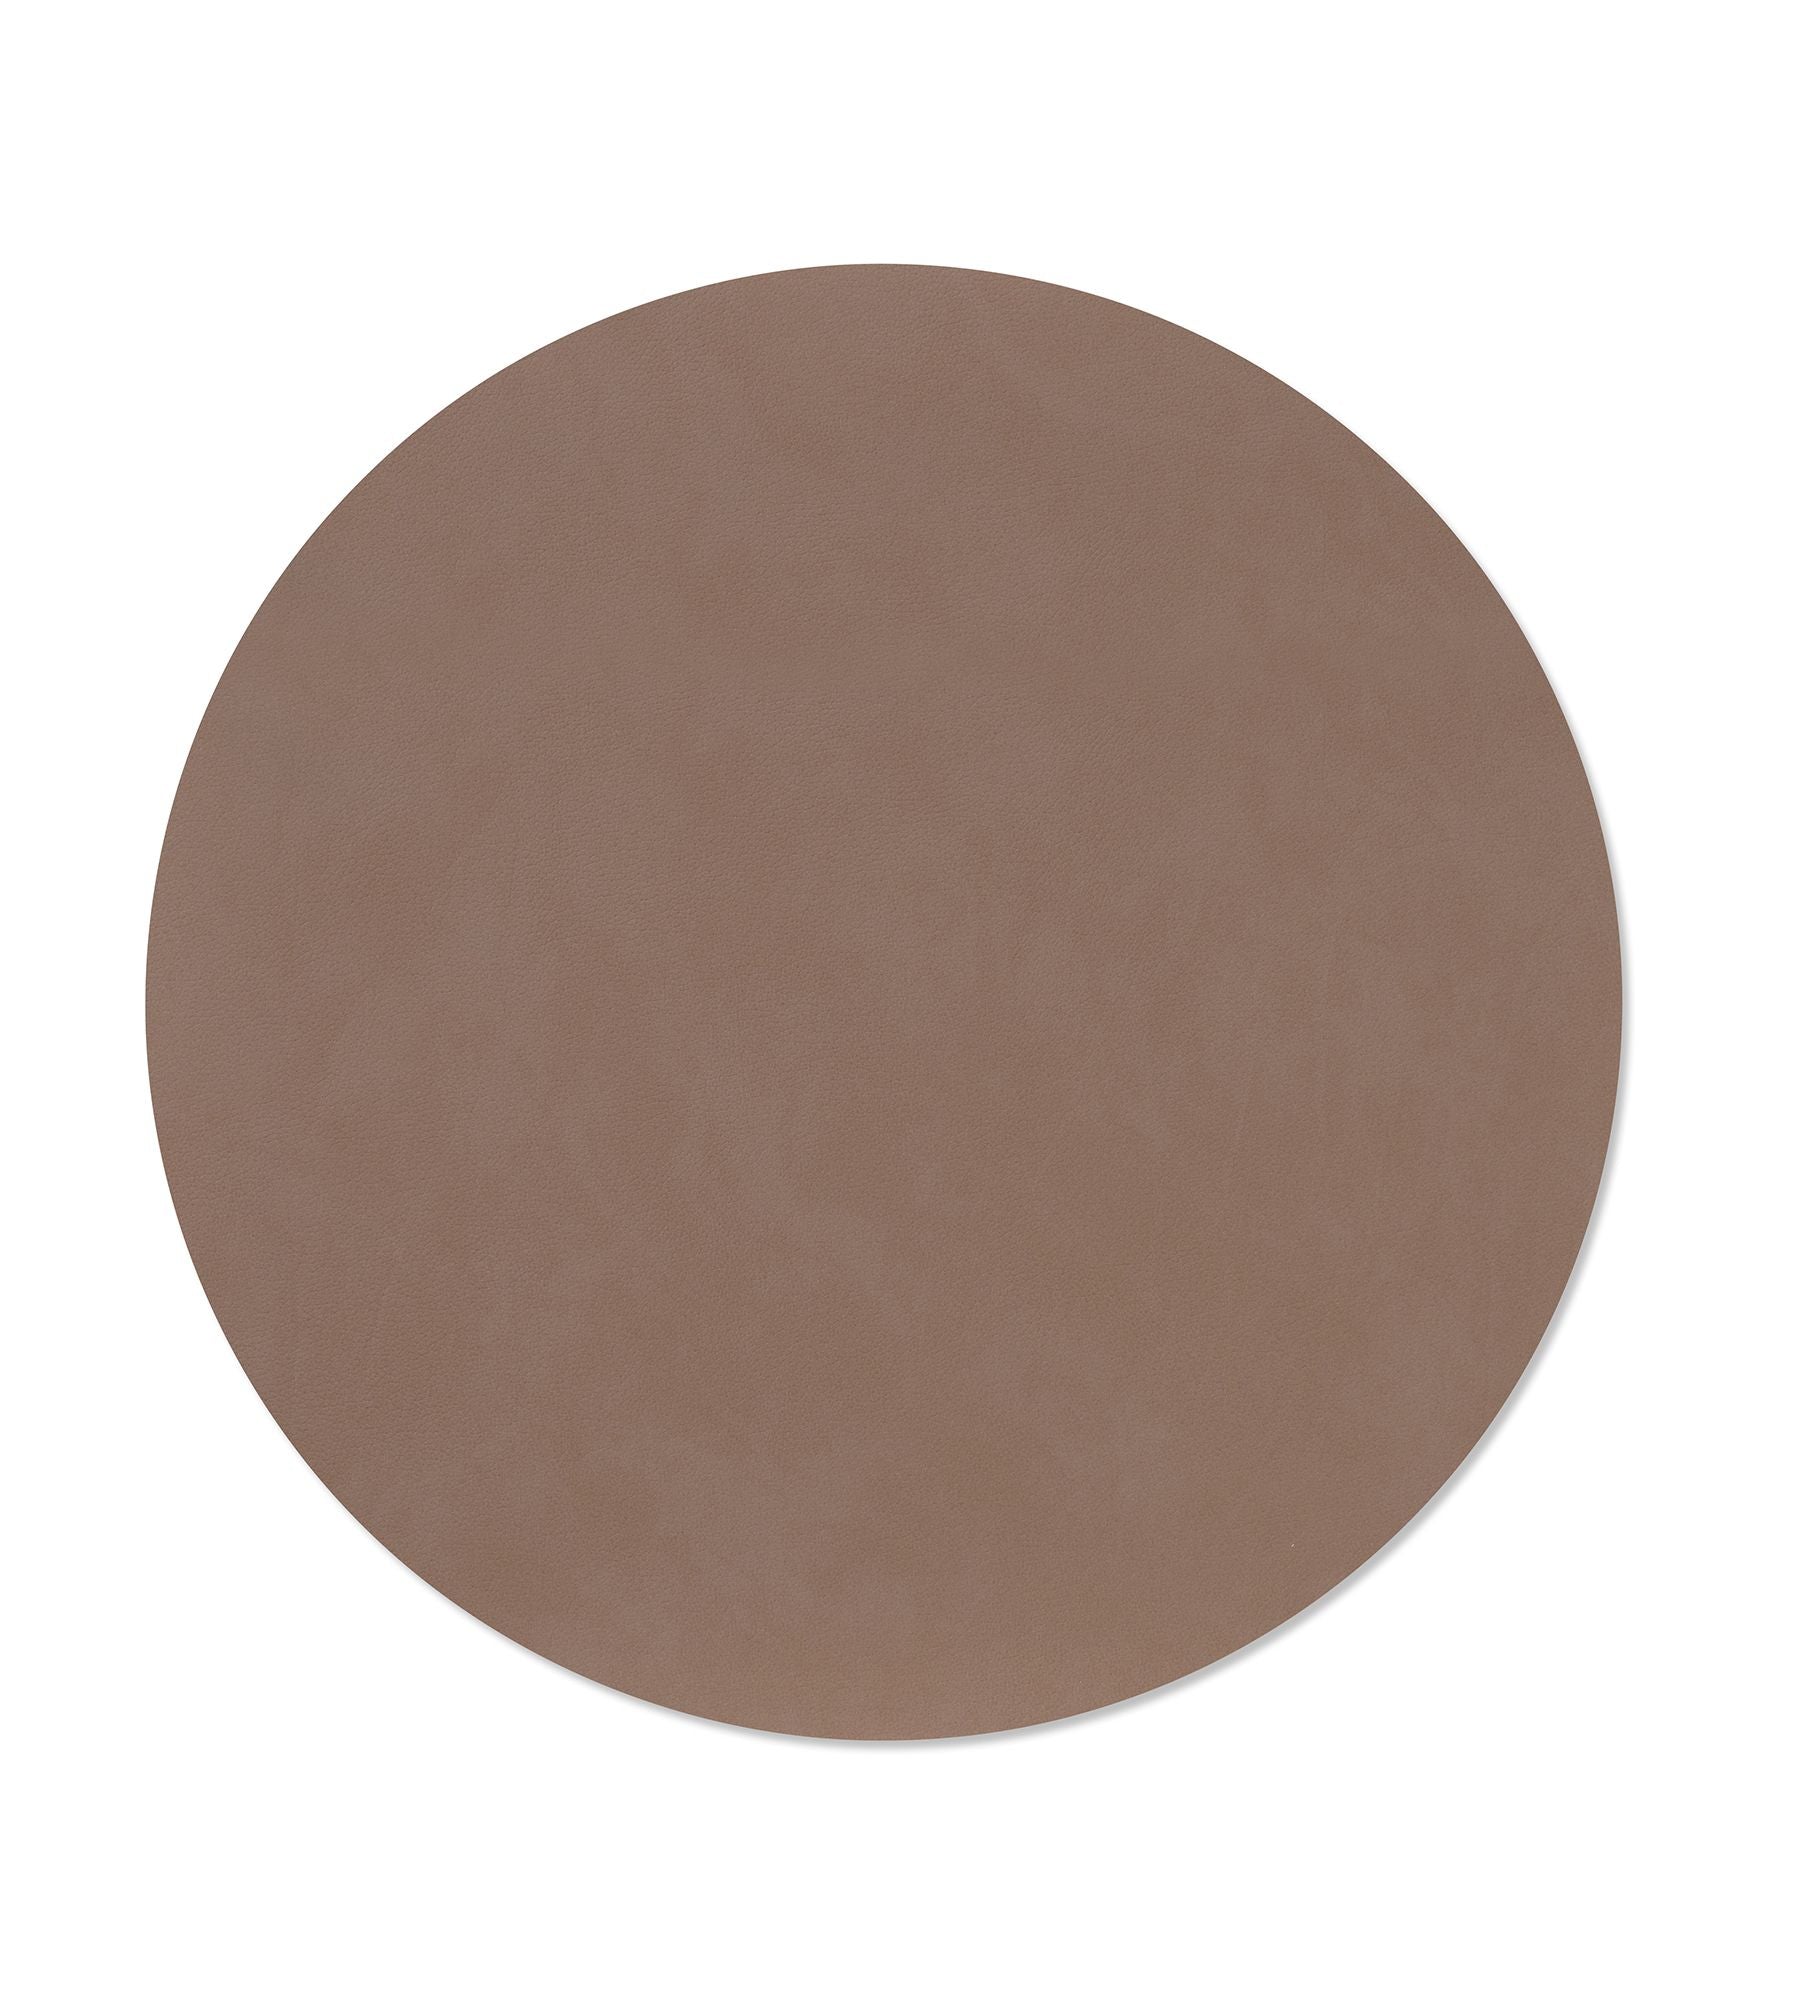 Lind Dna Table Mat Circle Large, Truffle